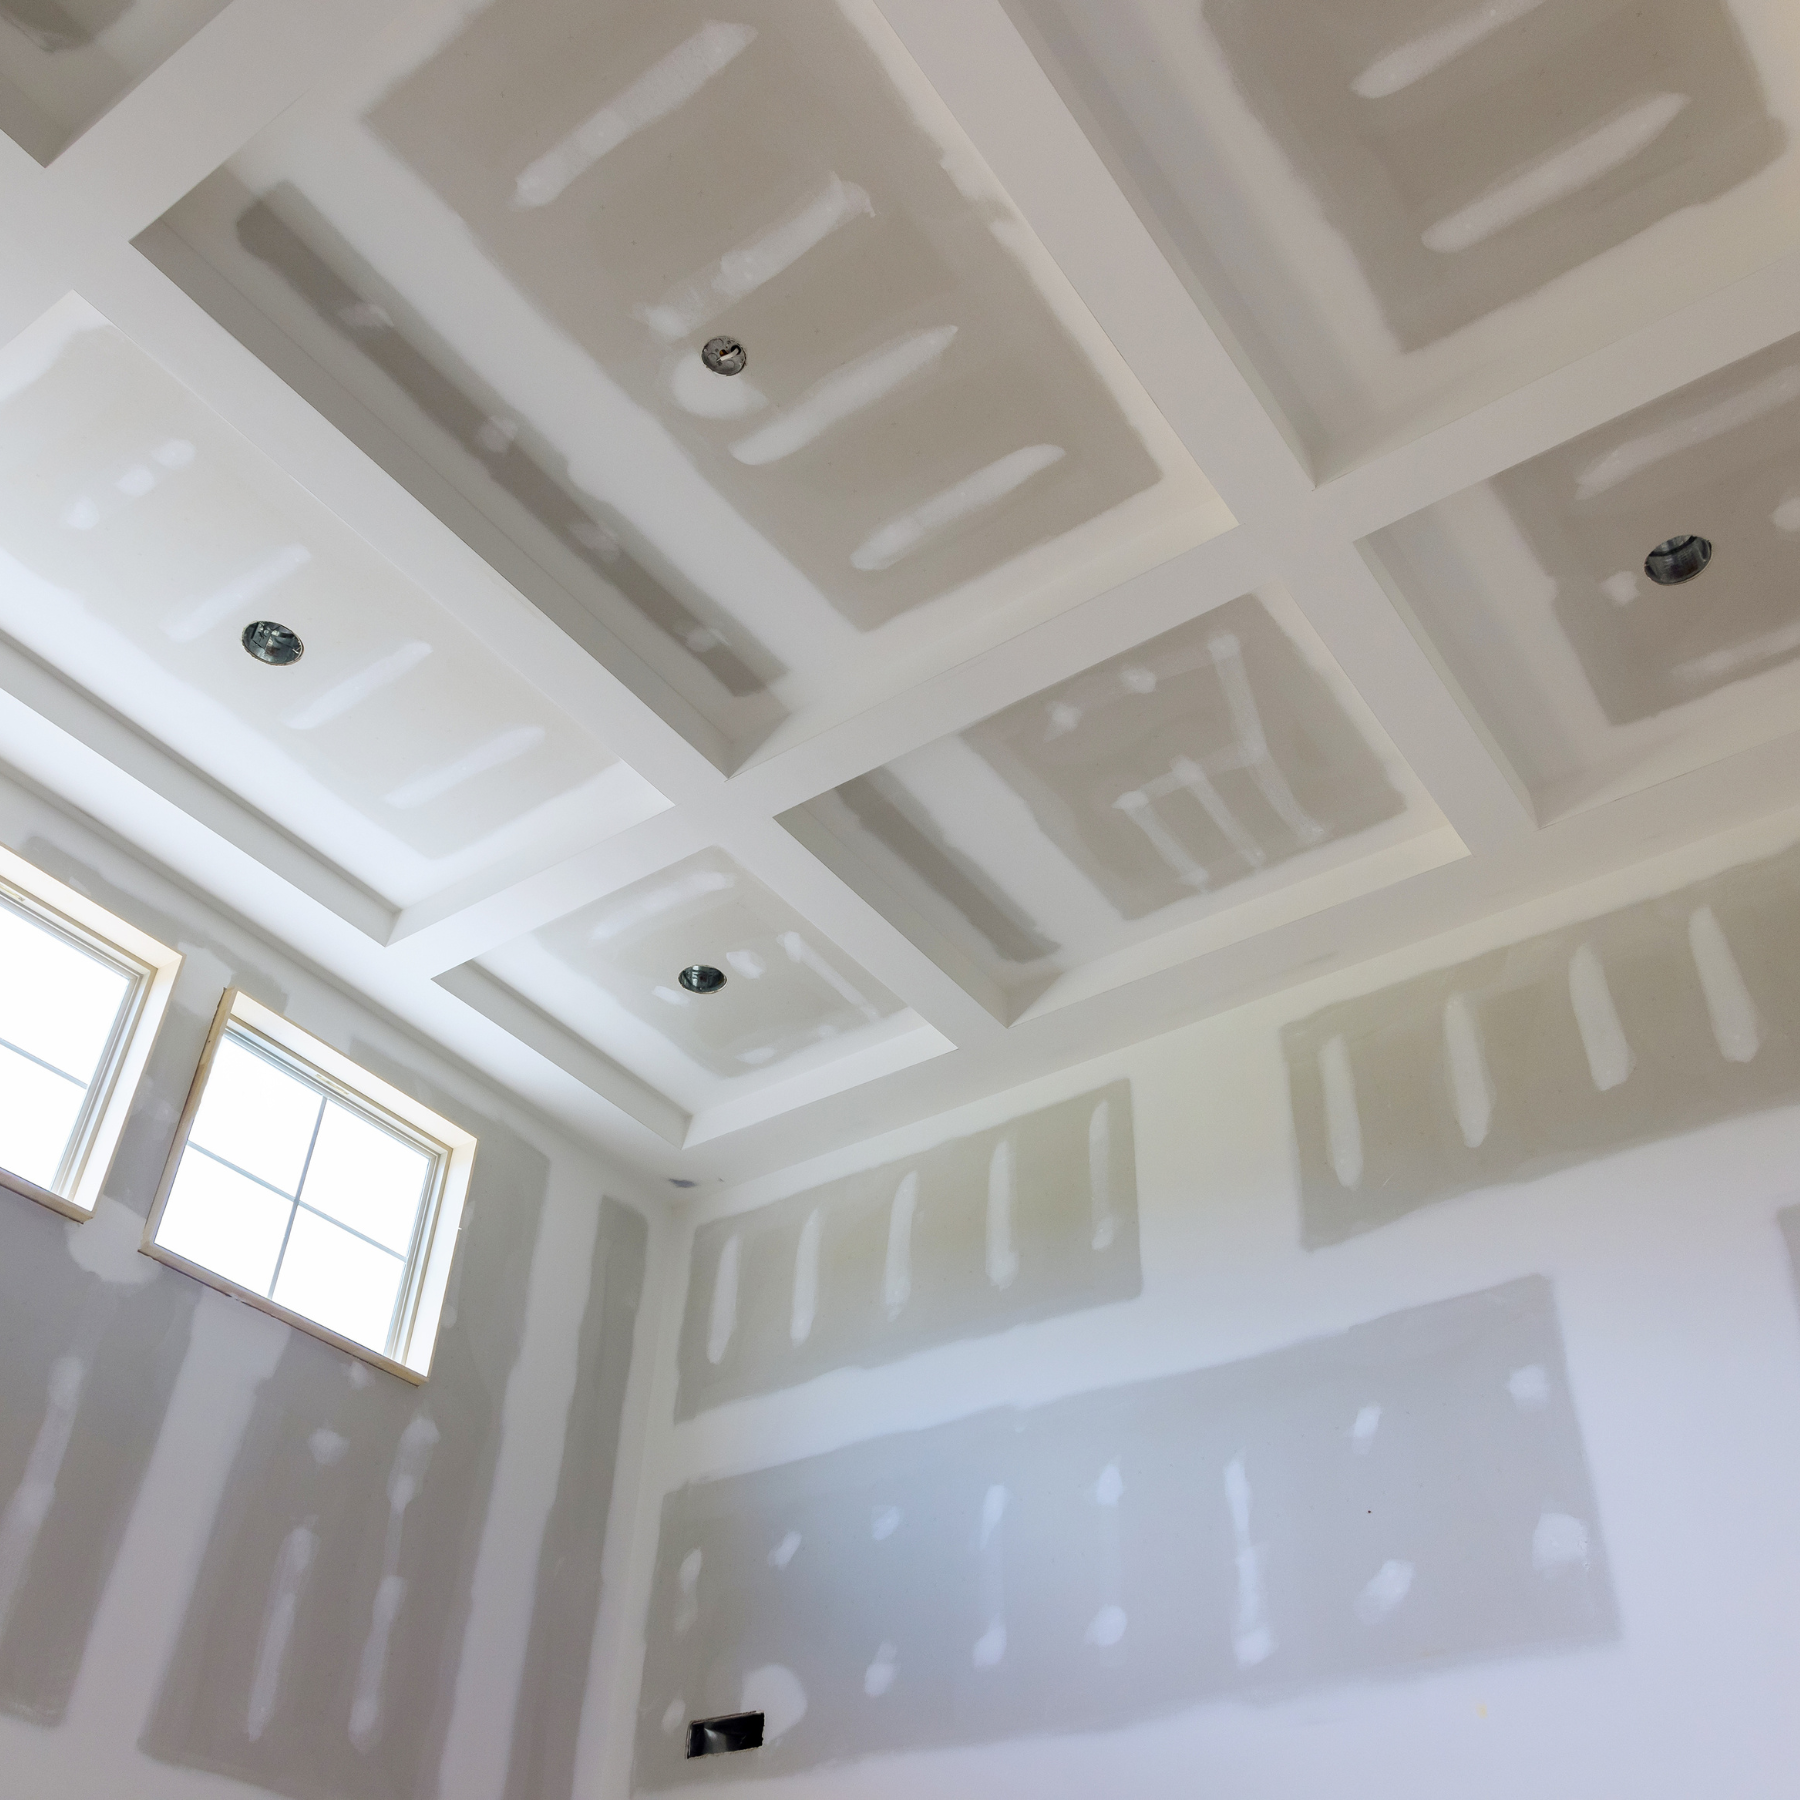 Drywall on ceilings and walls.